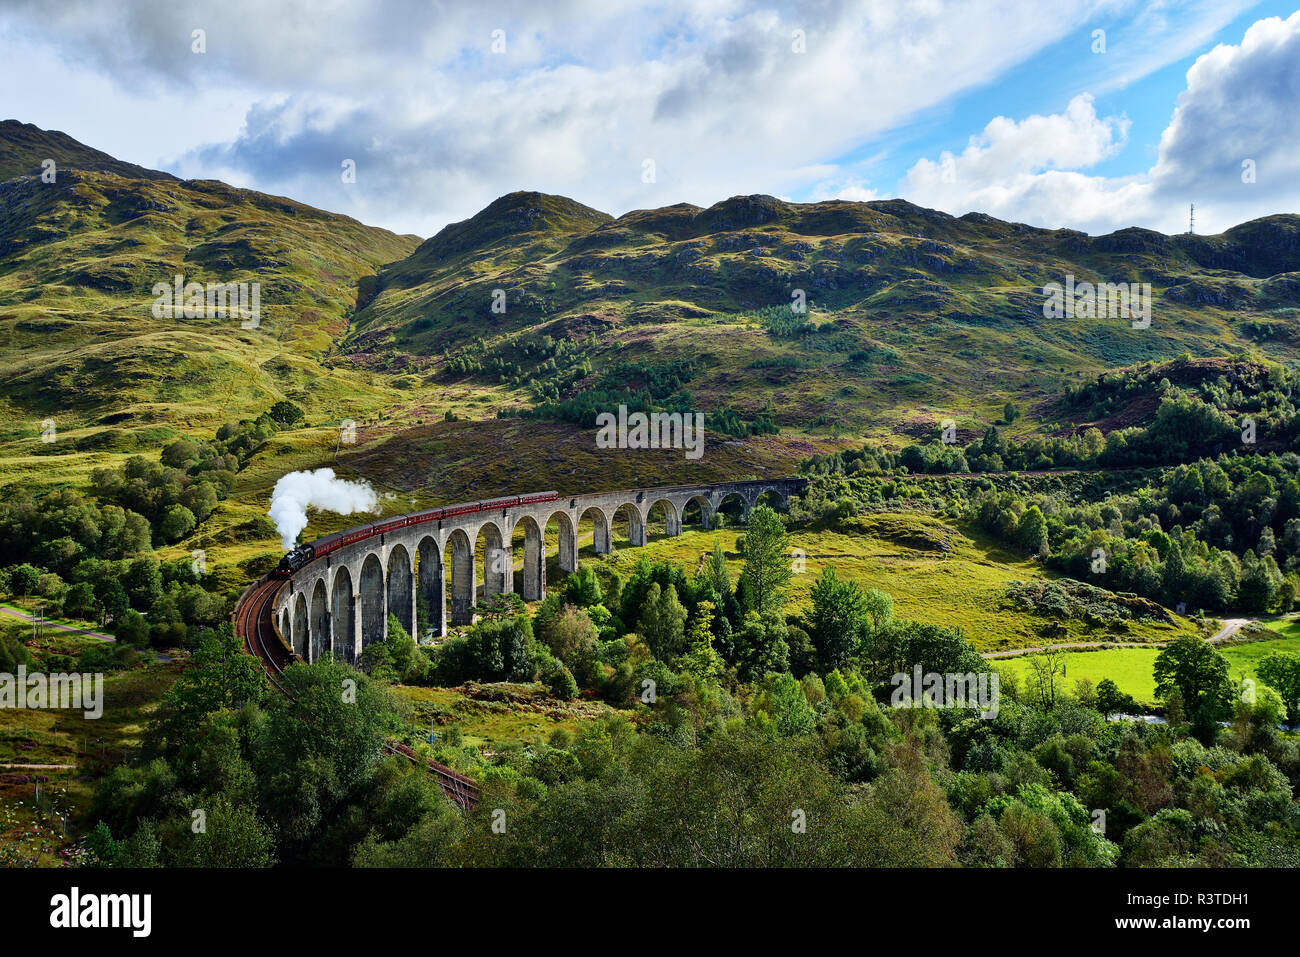 UK, Scotland, Highlands, Glenfinnan viaduct with a steam train passing over it Stock Photo